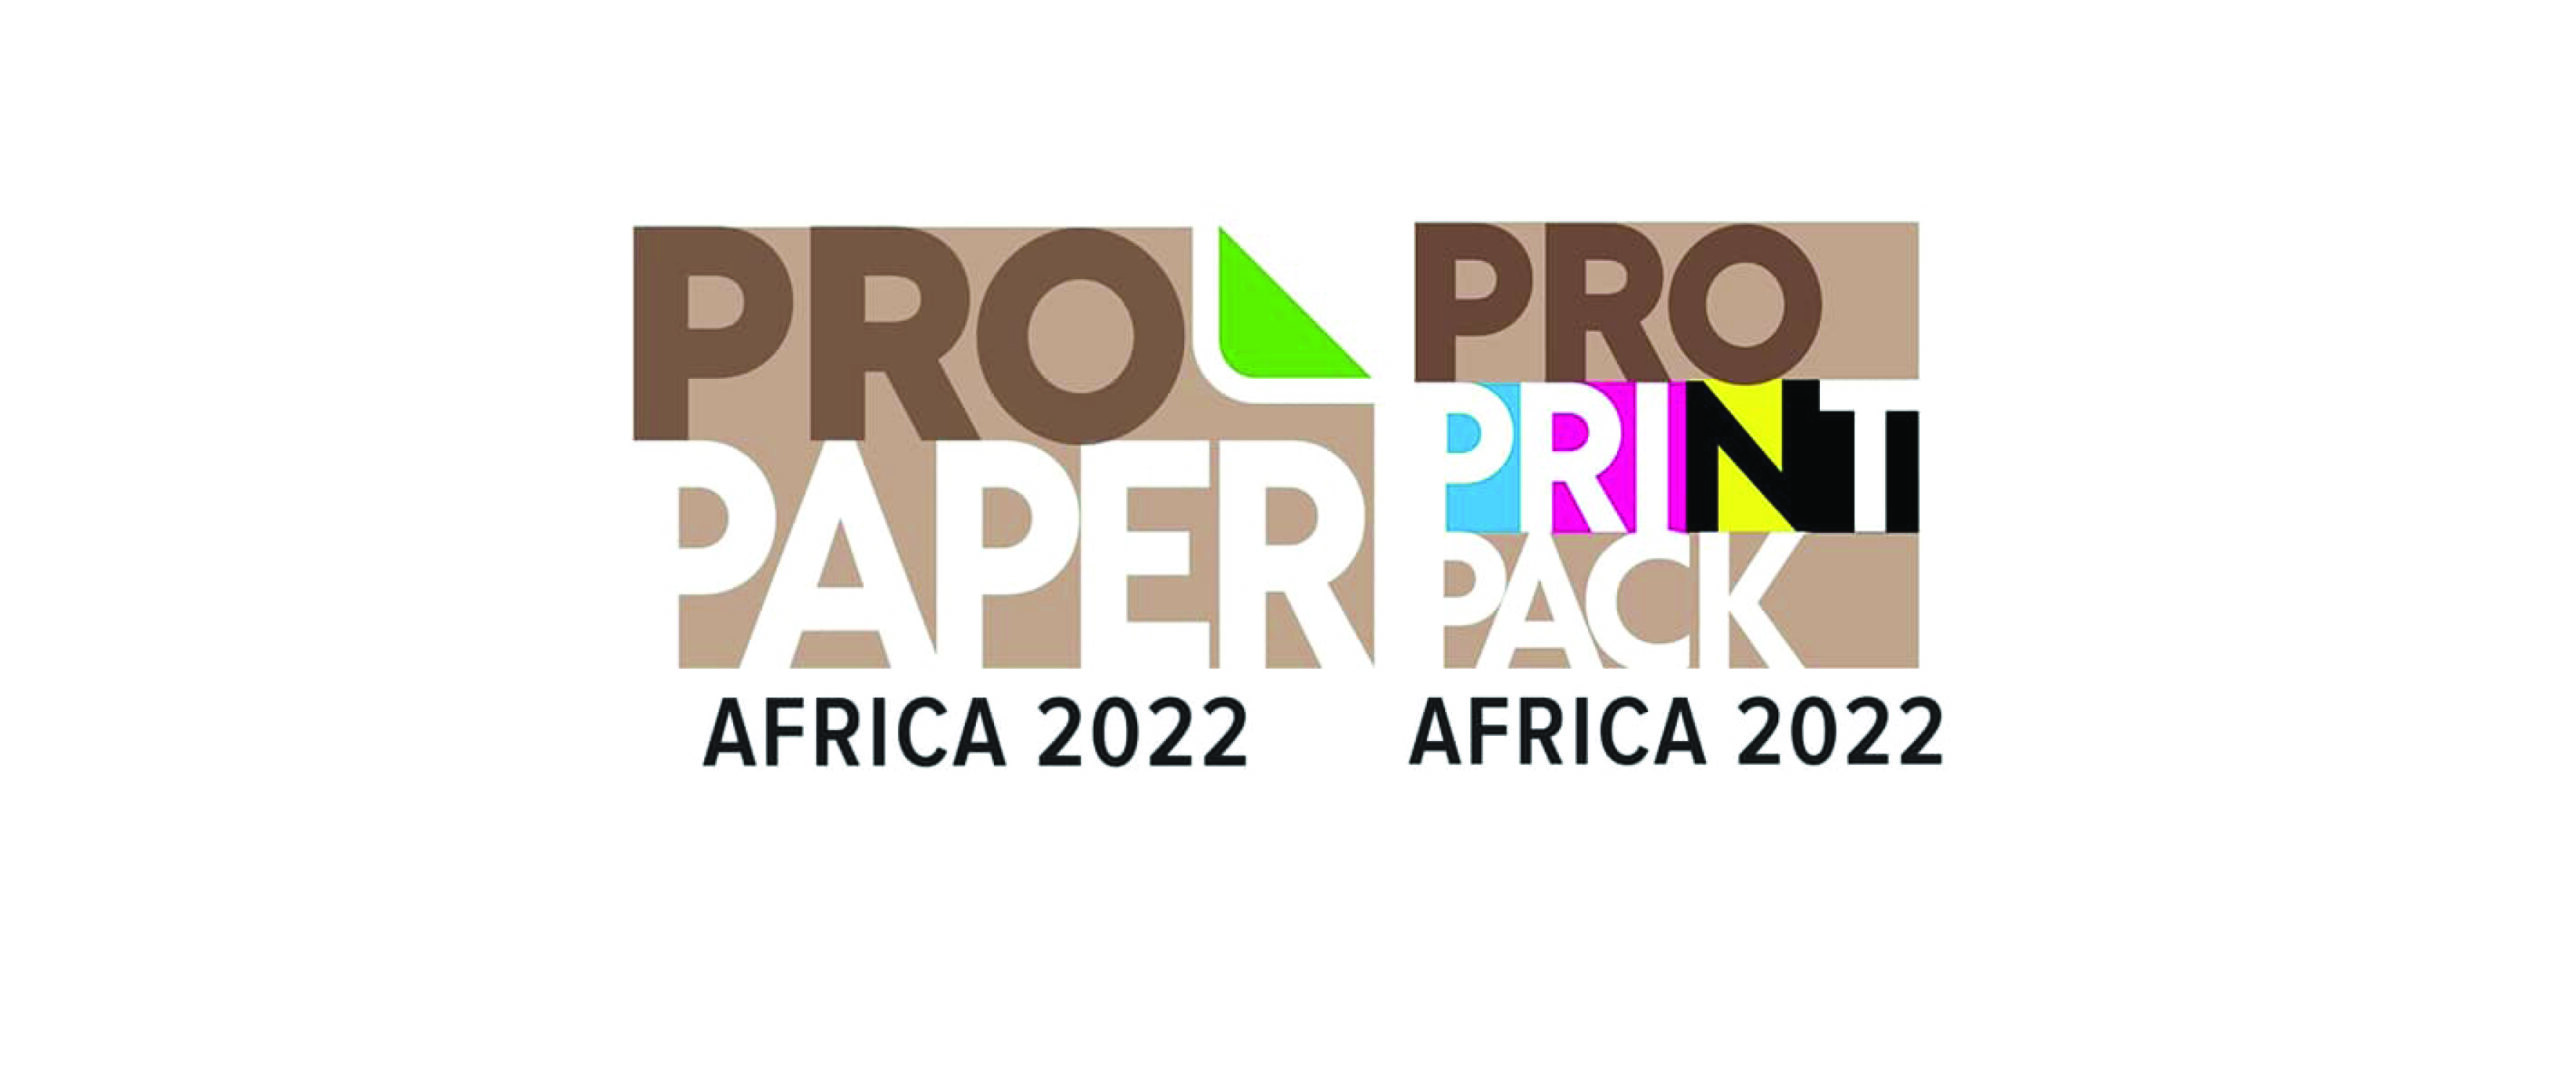 Pro Print Pack Africa 2022